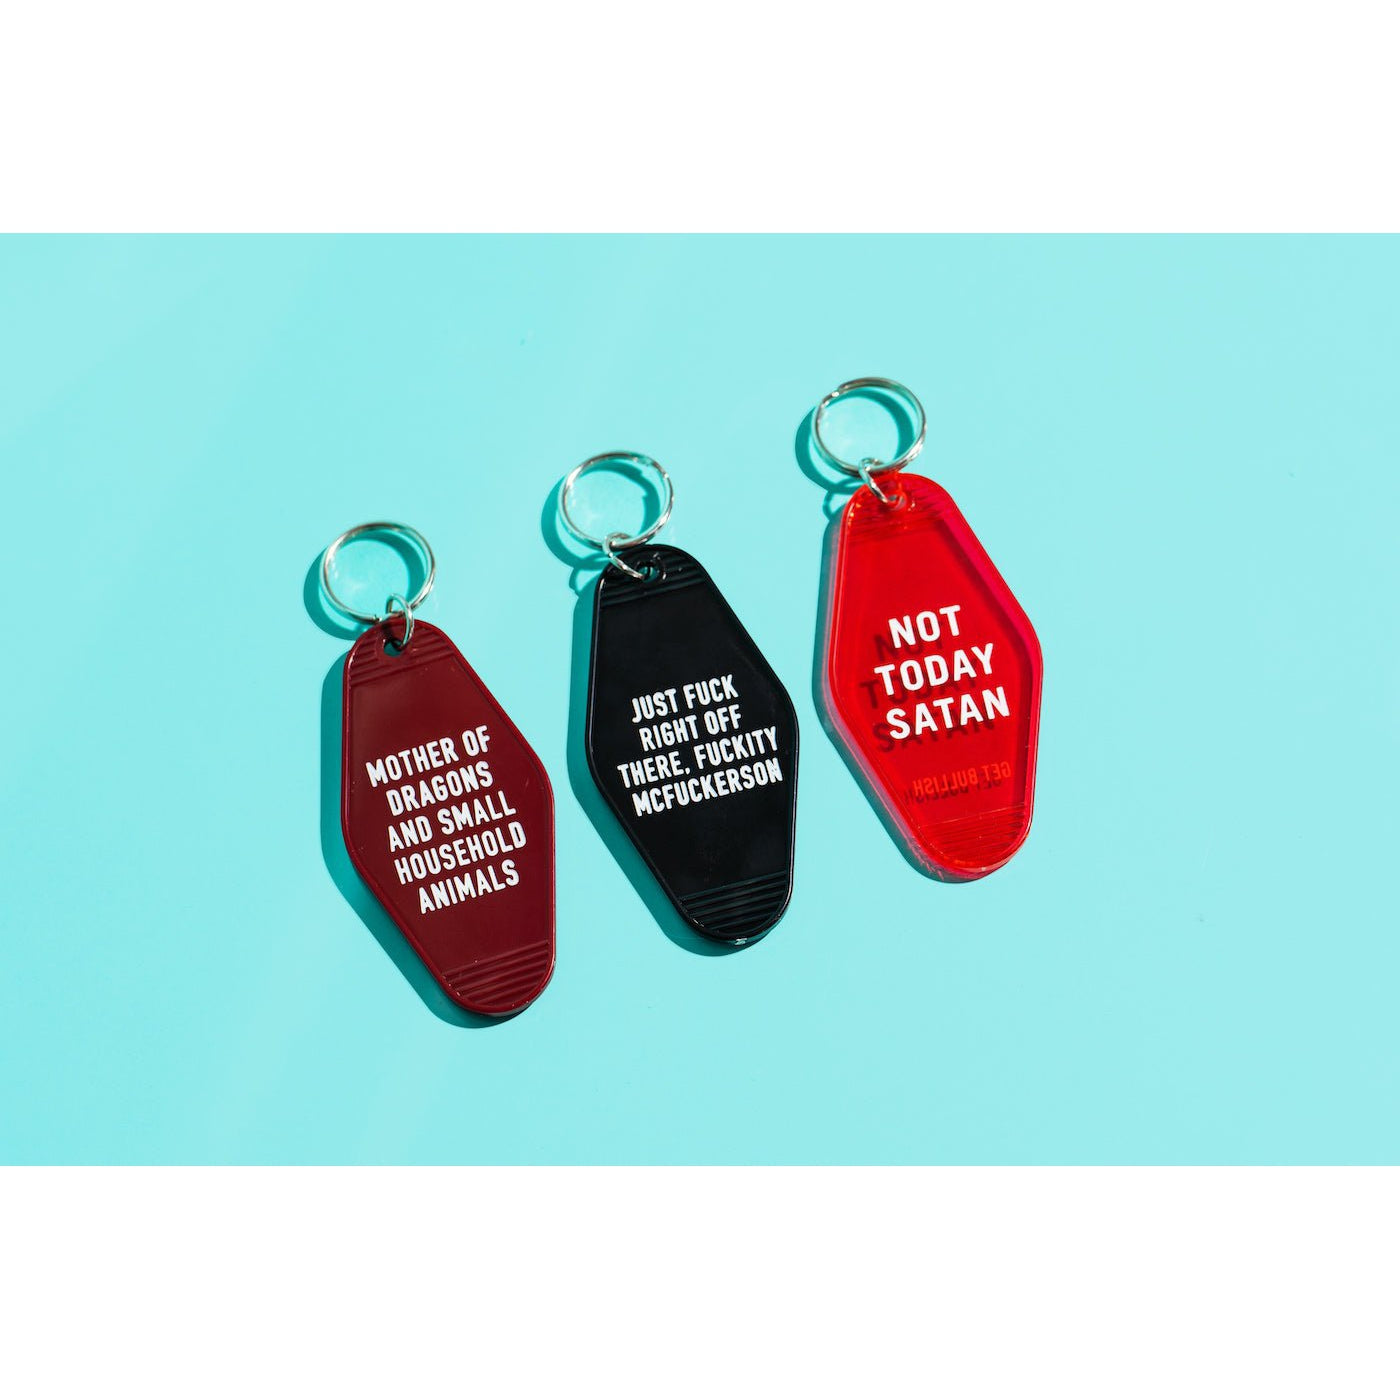 Mother of Dragons and Small Household Animals Motel Style Keychain in Dark Red